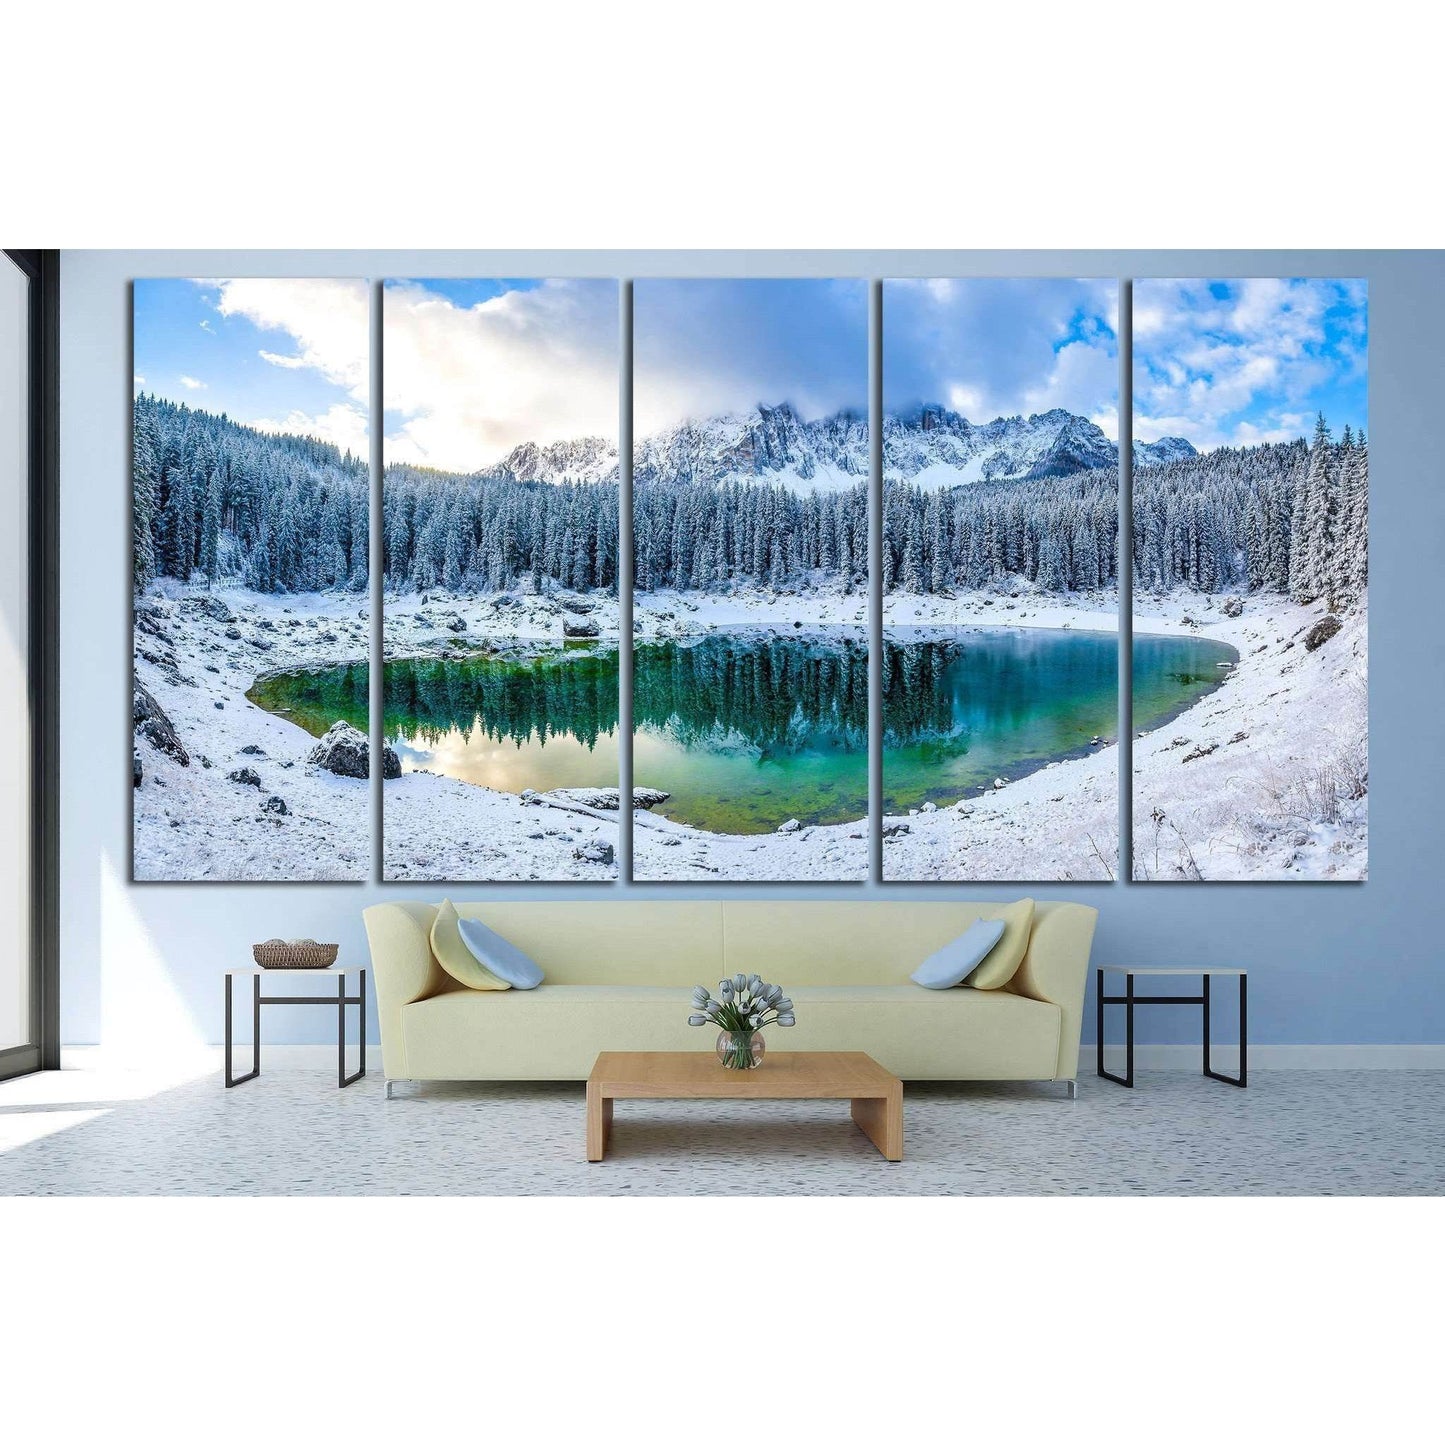 Snowy Mountain and Green Lake Multi-Panel Canvas for Modern DecorThis multi-panel canvas print presents a breathtaking snowy mountain landscape with a crystal-clear lake. The stark white snow contrasts with the vibrant green of the lake, bringing a touch